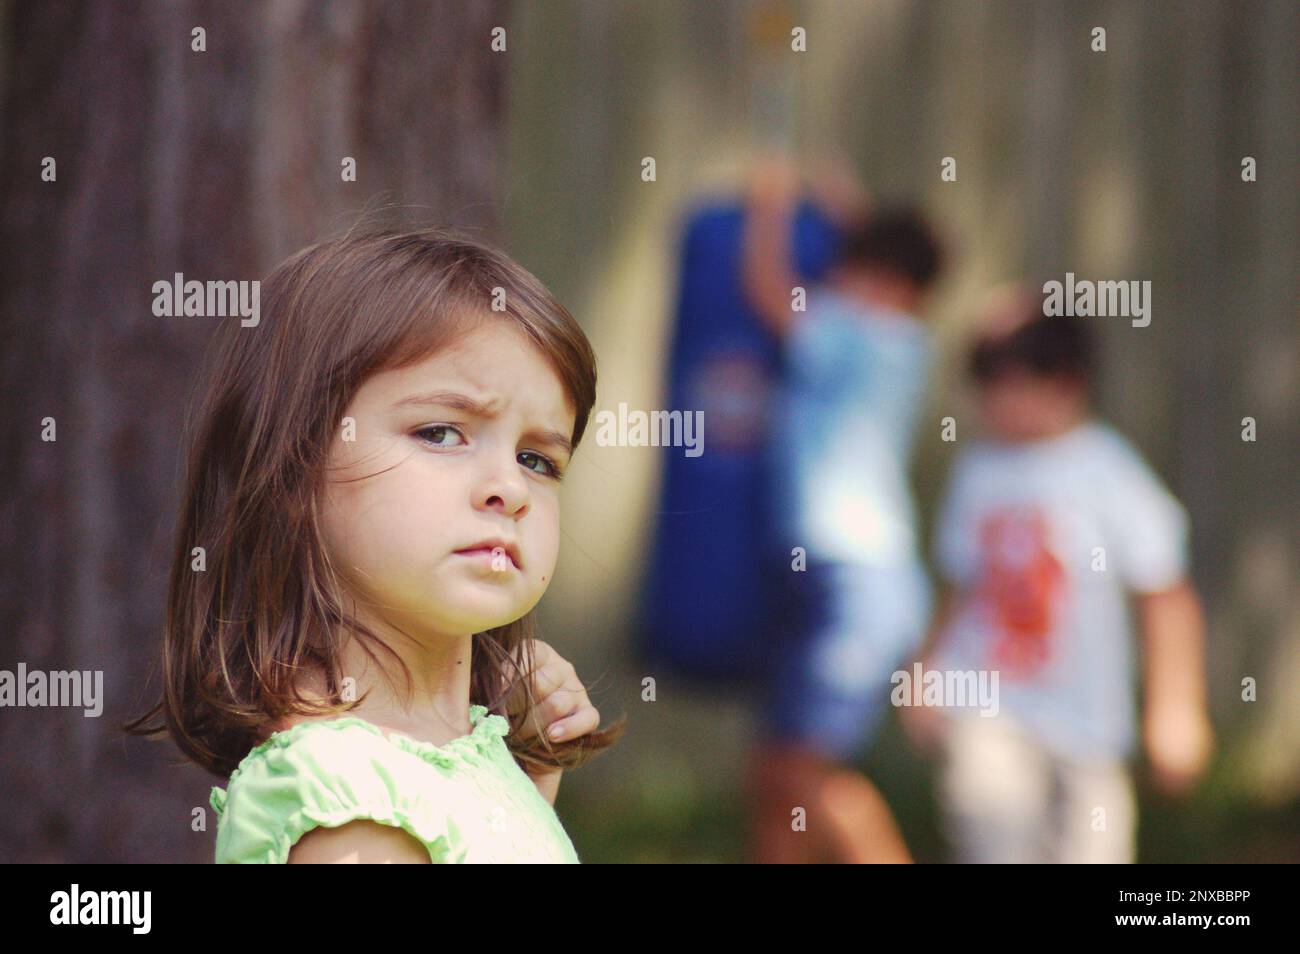 Portrait of an unhappy girl feeling left out with two boys playing in the background, USA Stock Photo